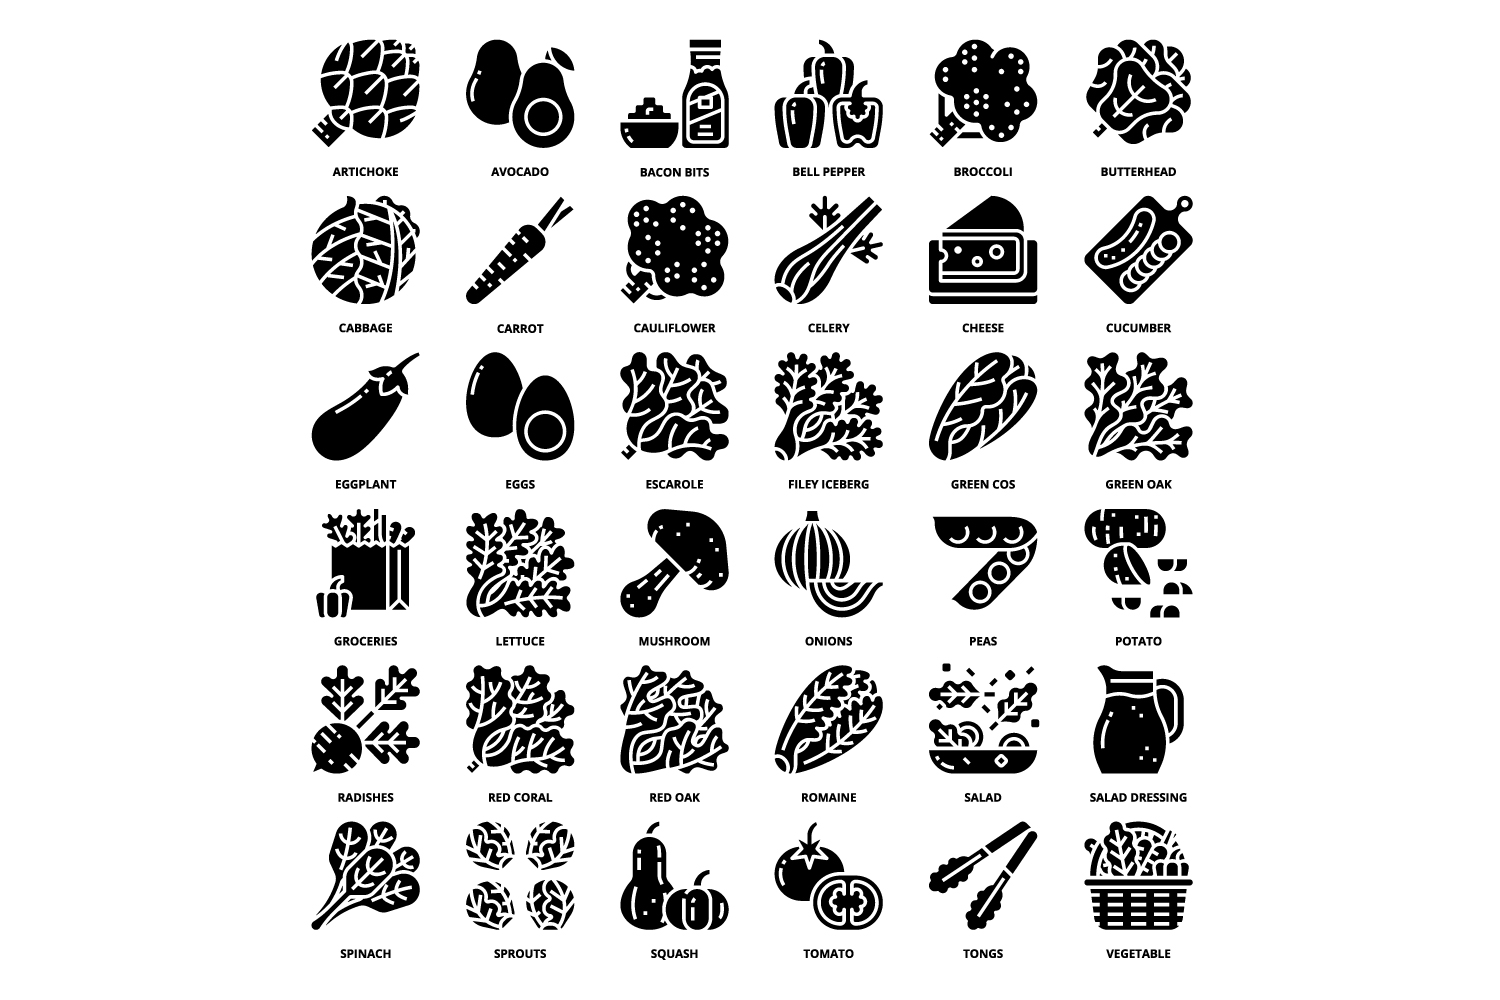 Black and white image of a bunch of food.